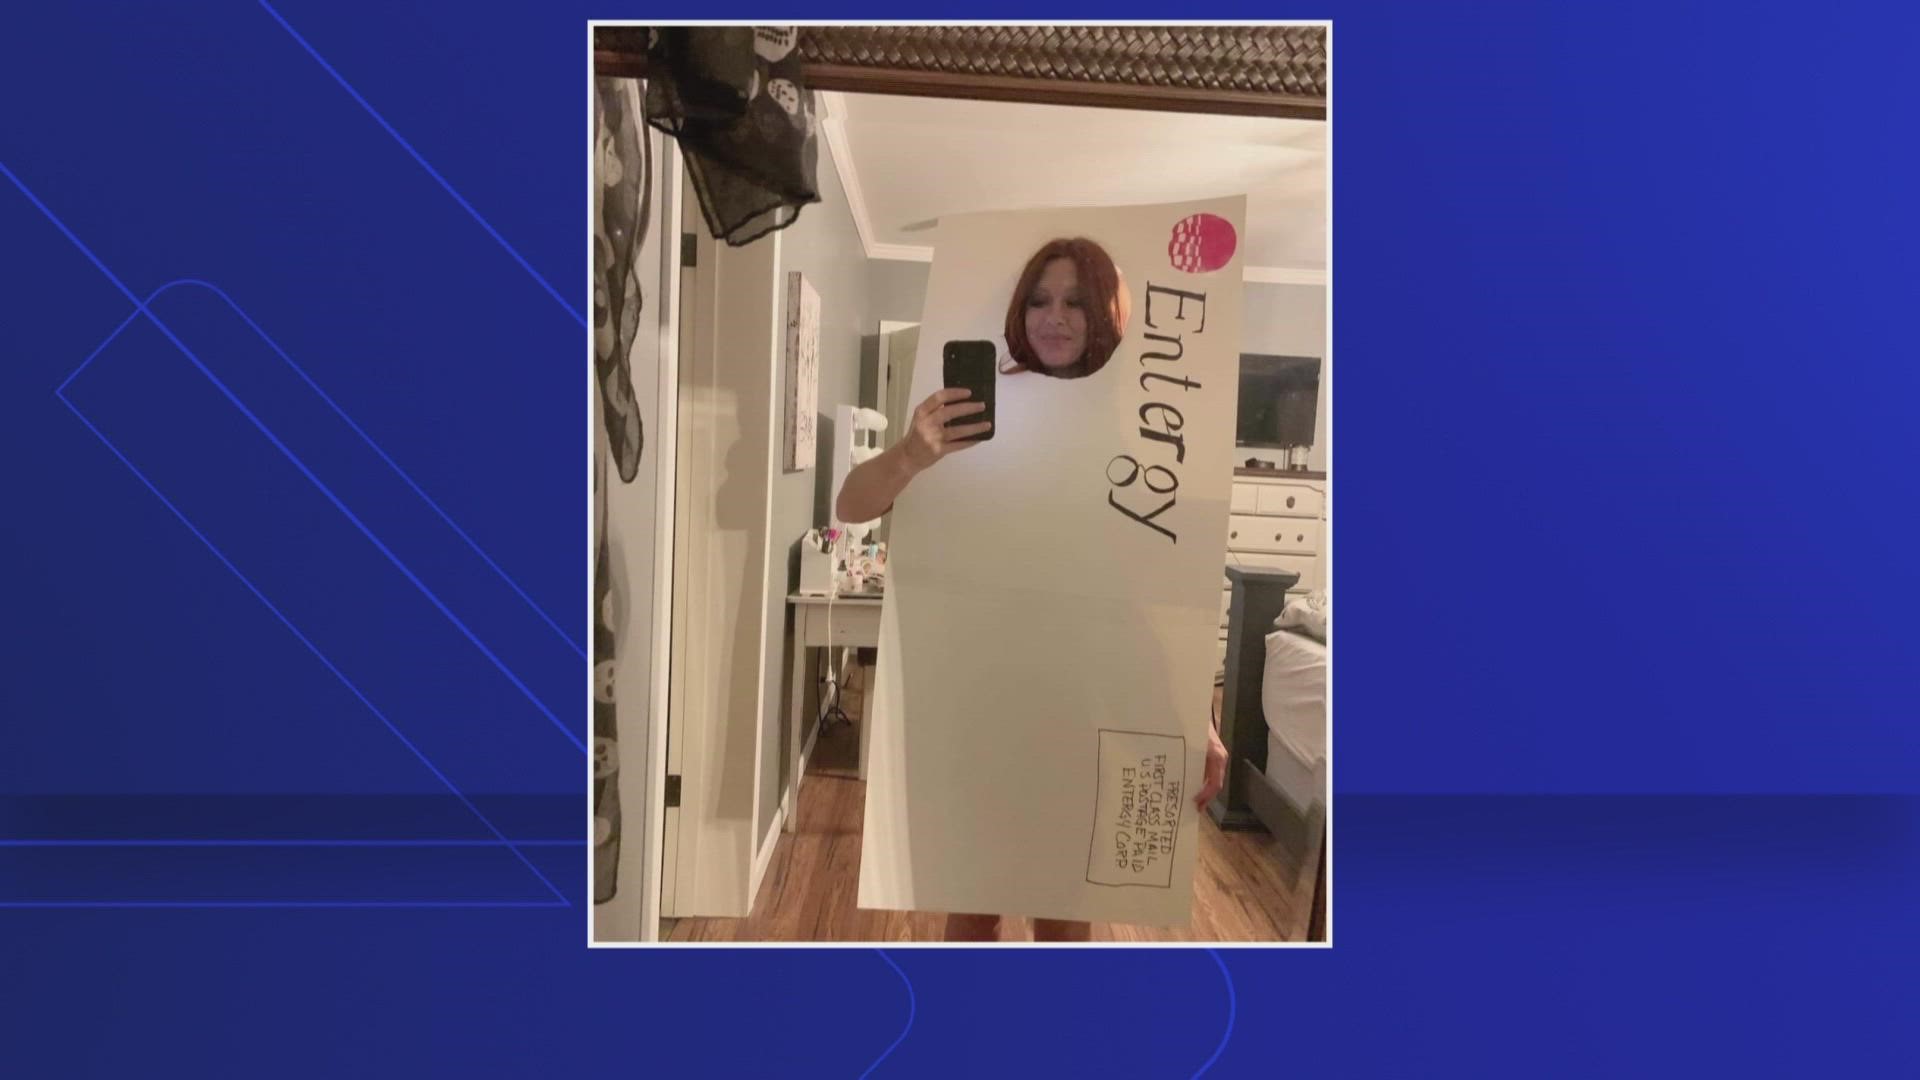 It may be August, but Chrystal Simon Boutte already has her Halloween costume ready!